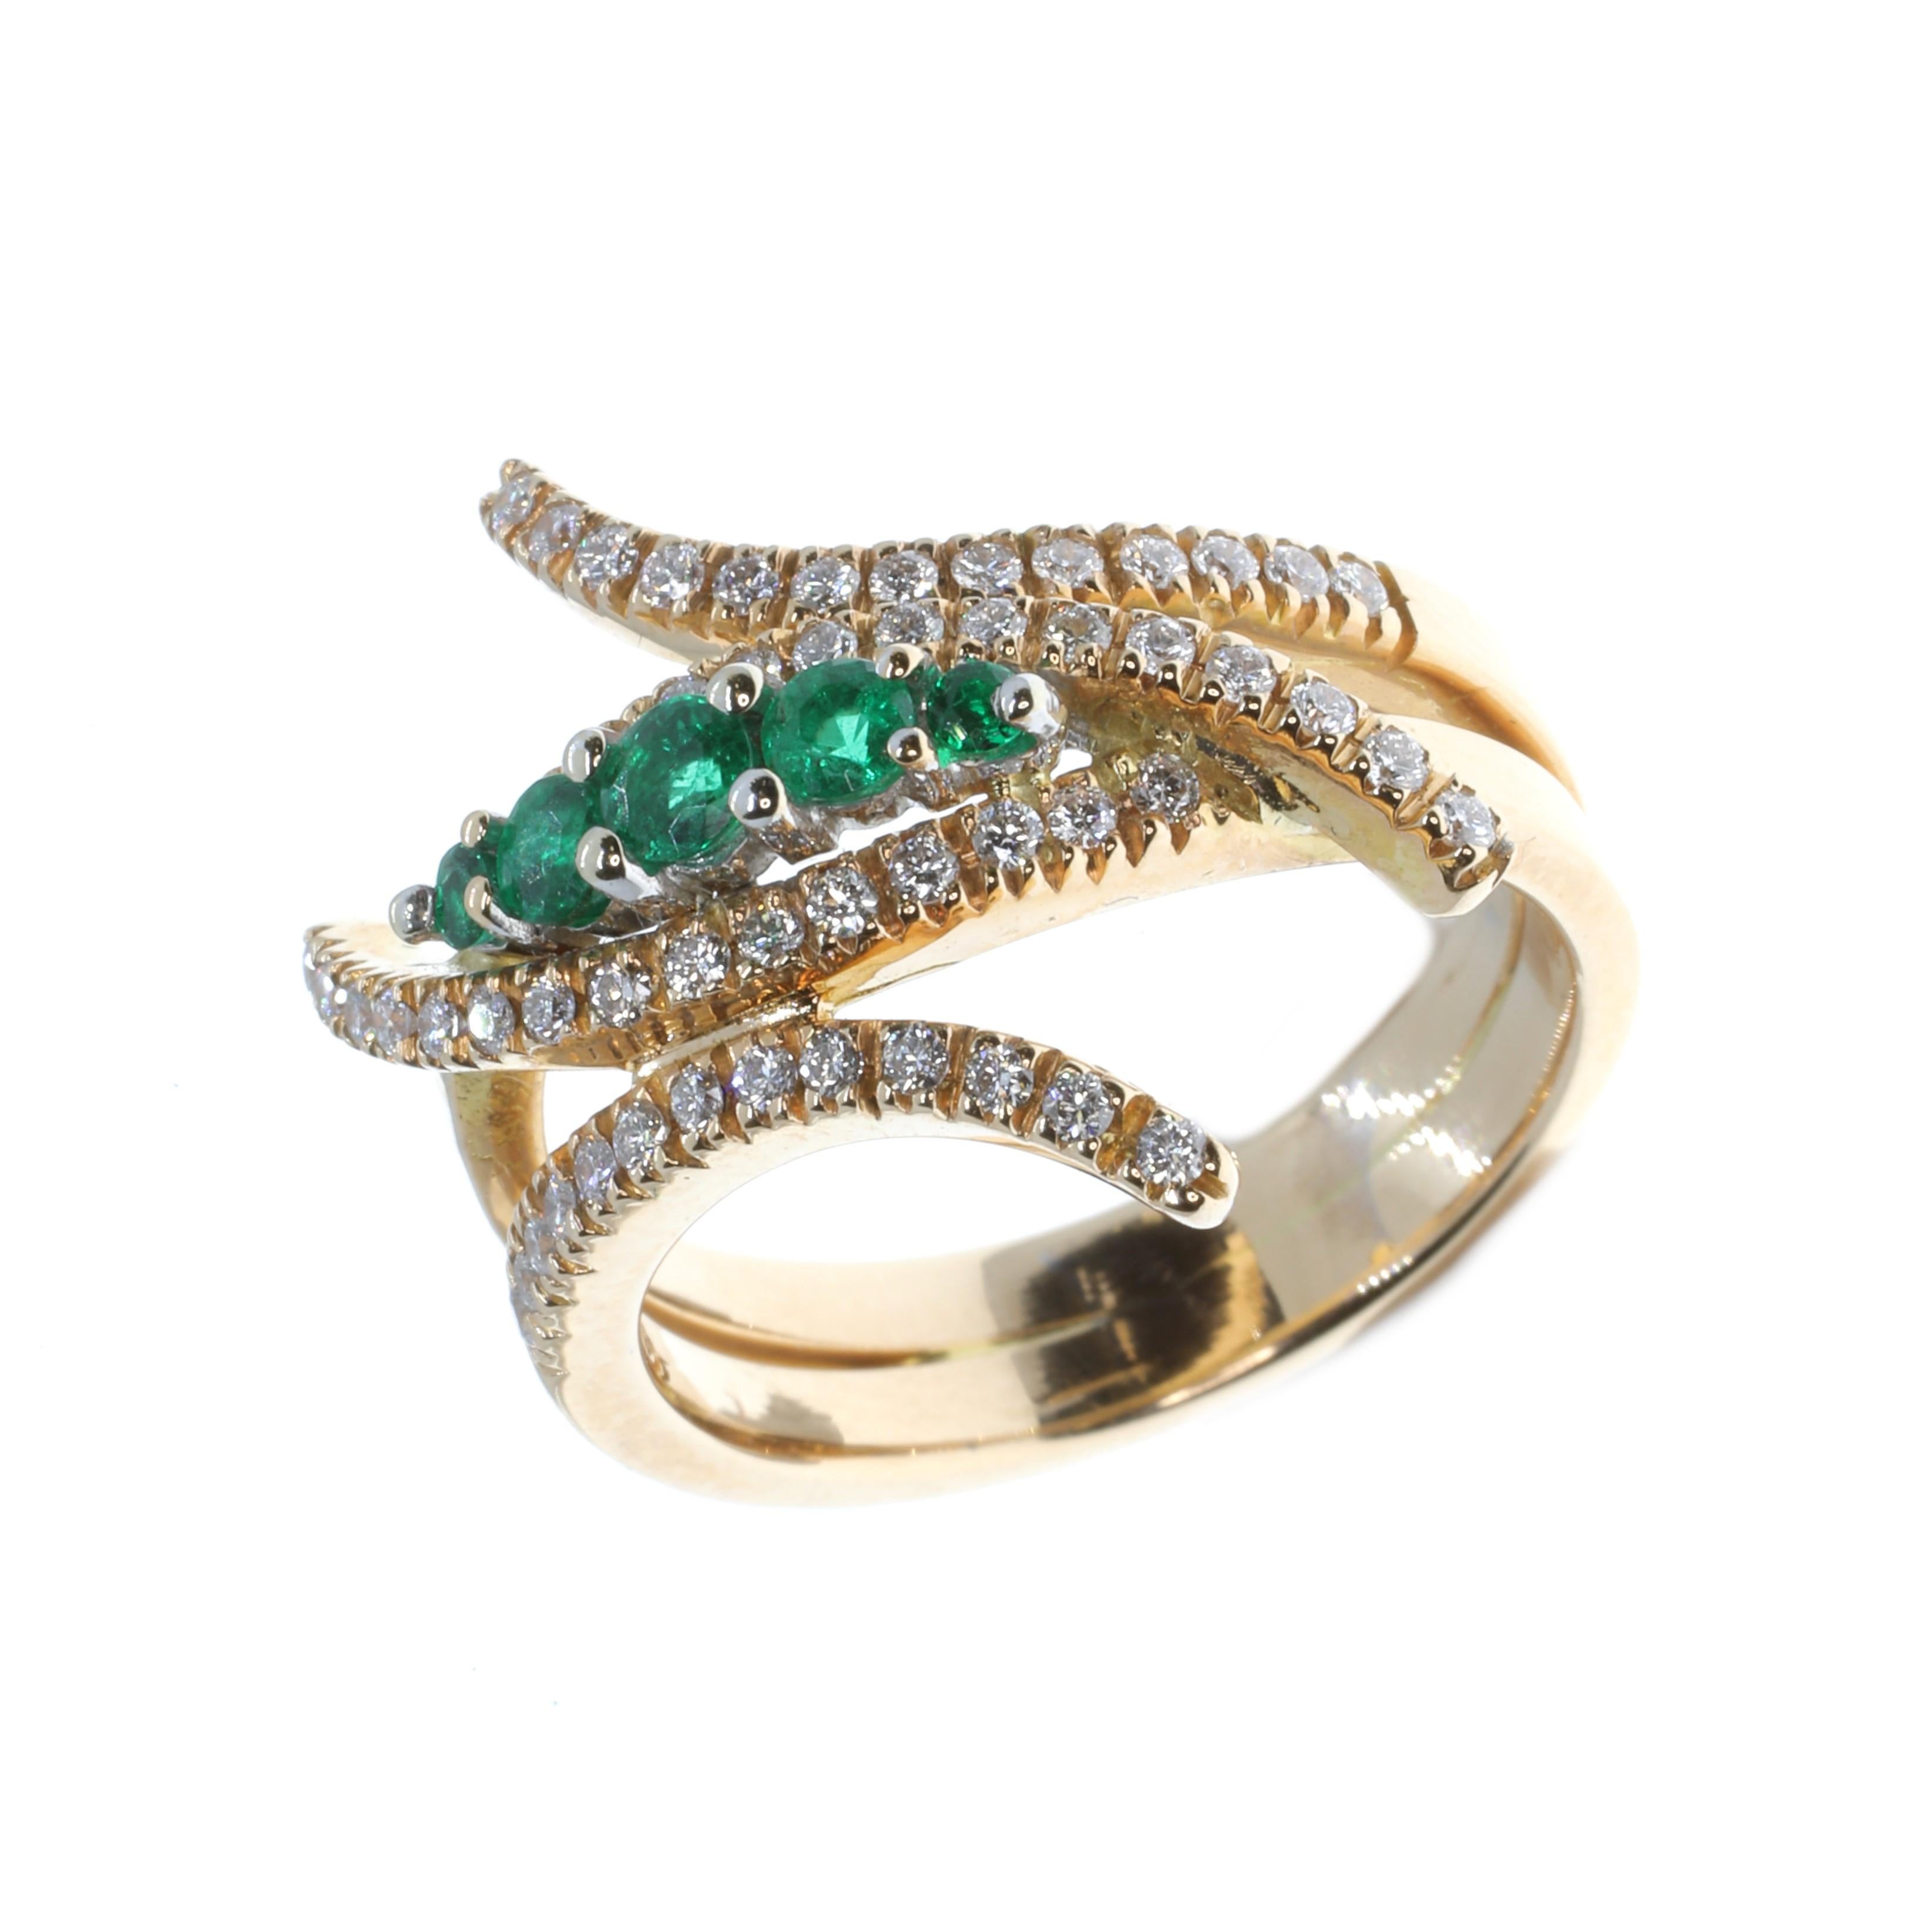 Spectacular, modern and luxurious, this 18-karat rose gold ring is a statement piece. Masterfully created by hand, the design and colour combination demand attention. This ring features carefully selected emeralds and diamonds, which are set in